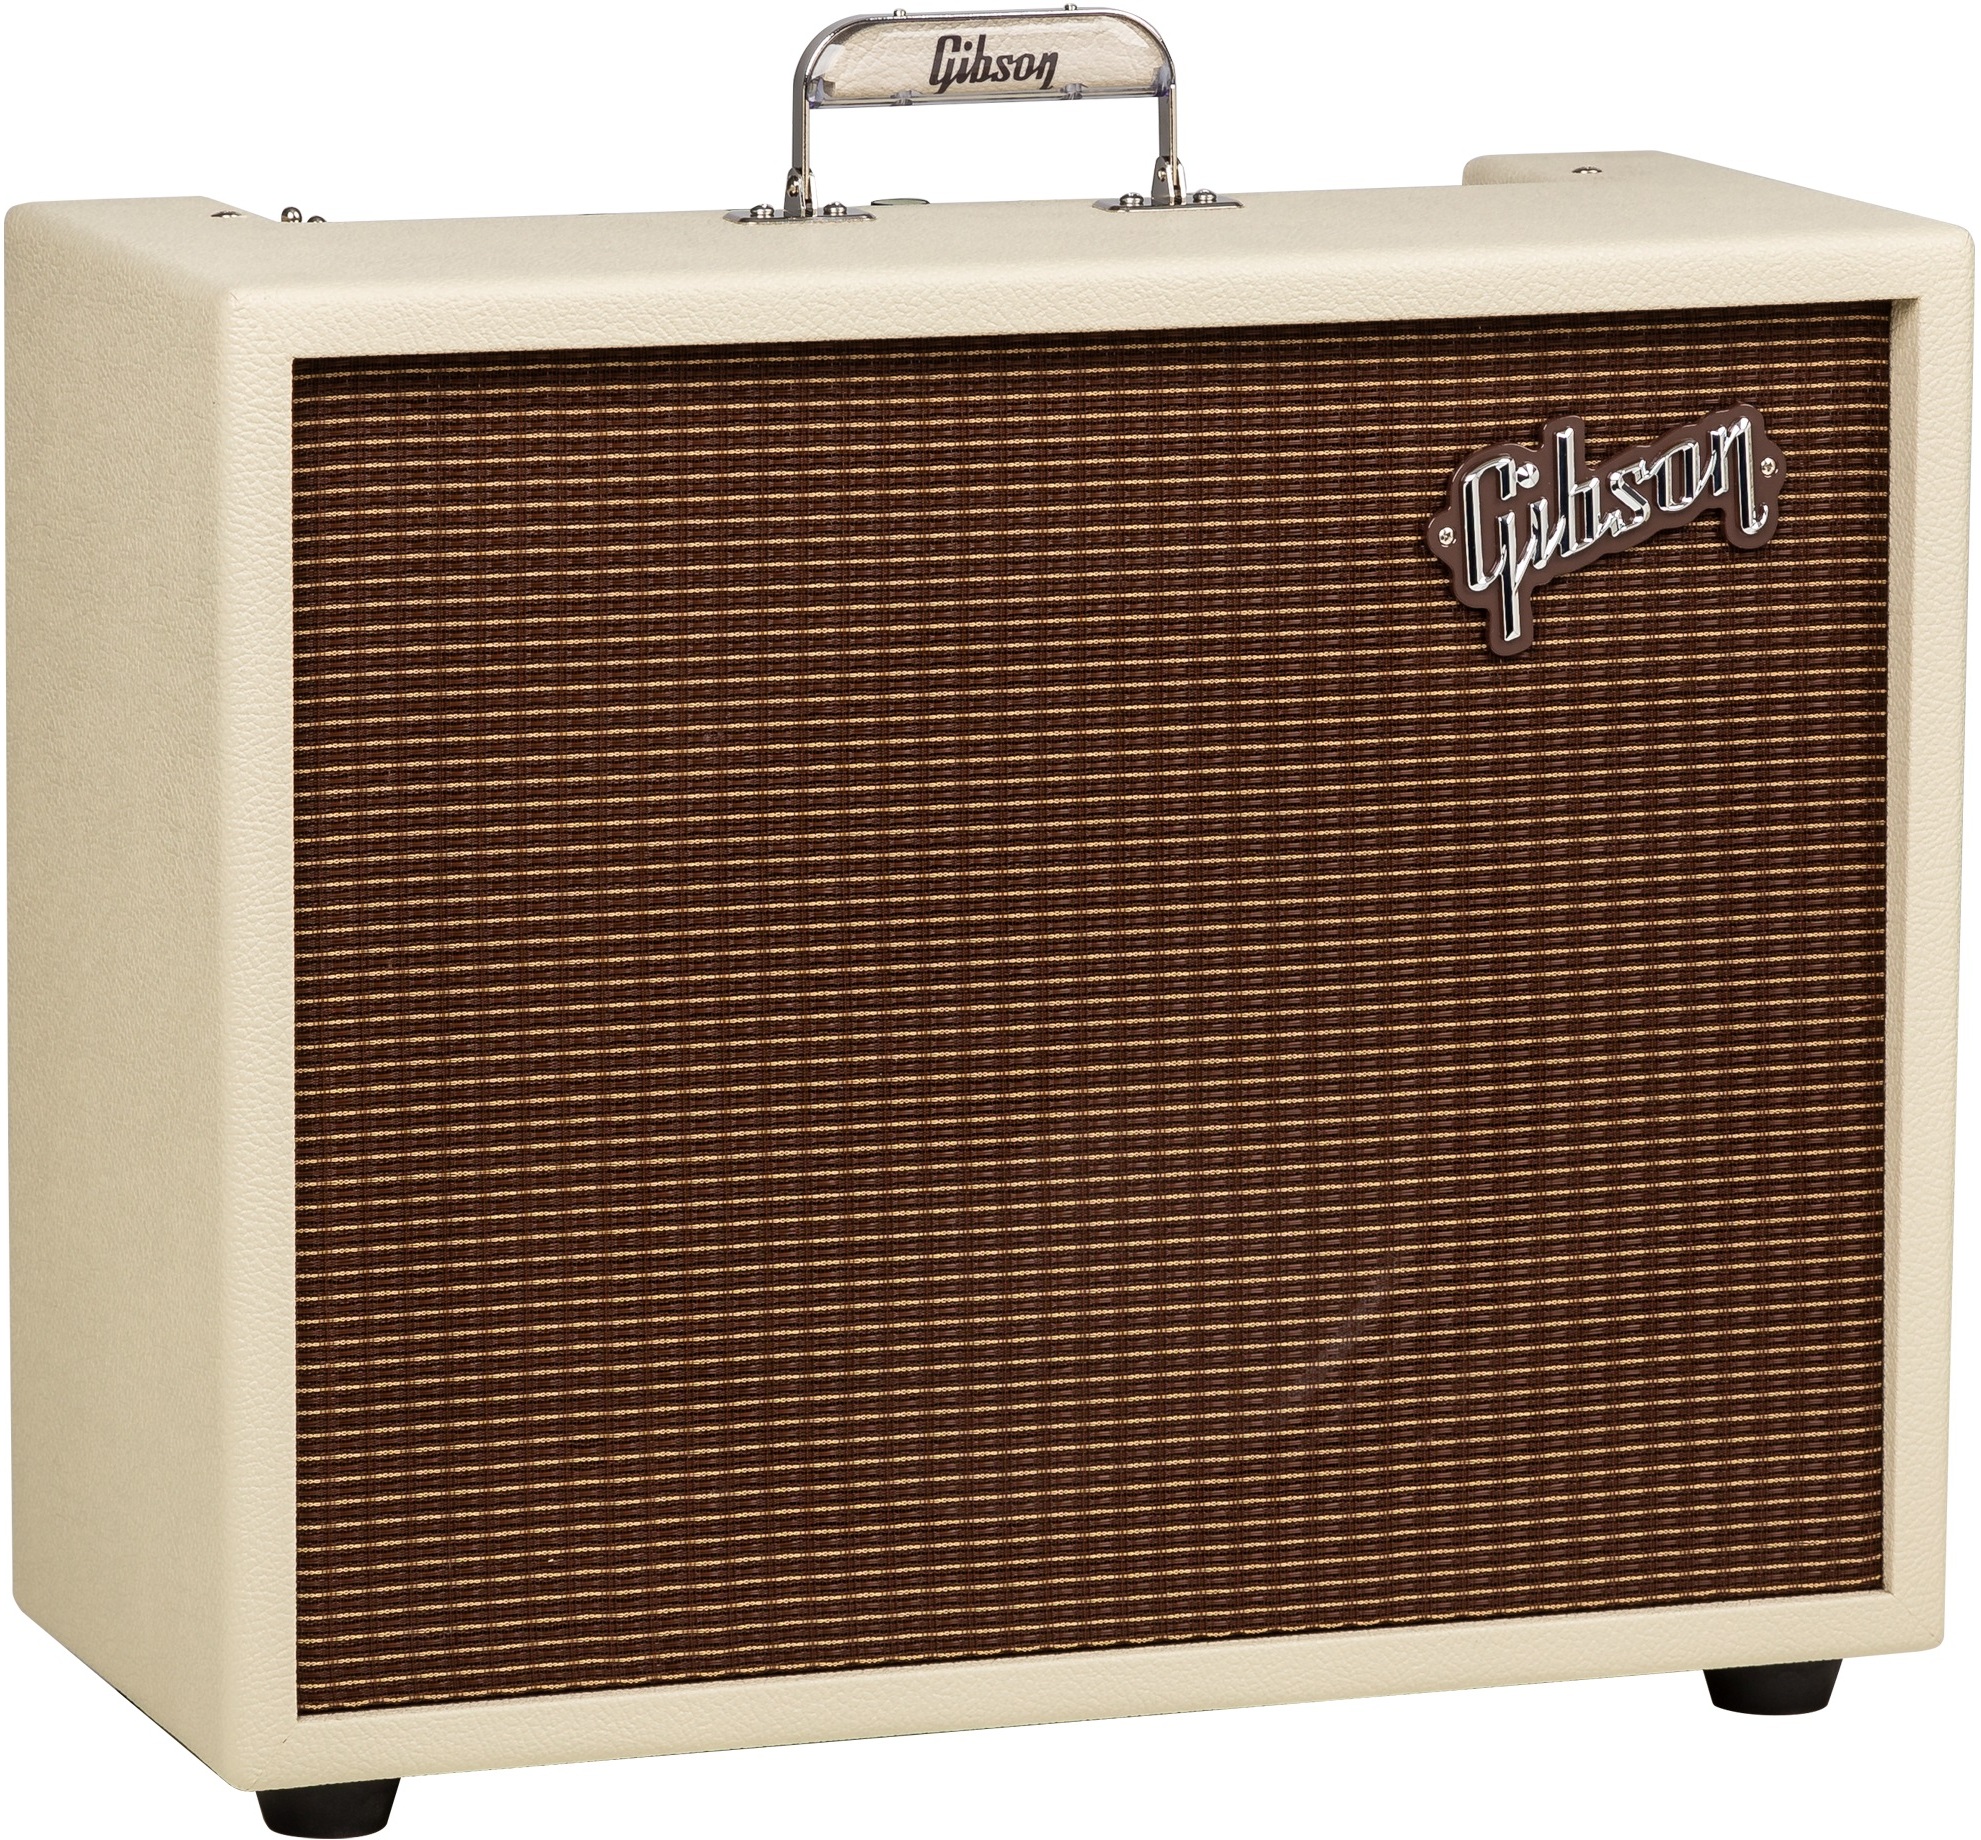 Gibson Falcon 20 Combo 12w 1x12 - Electric guitar combo amp - Main picture